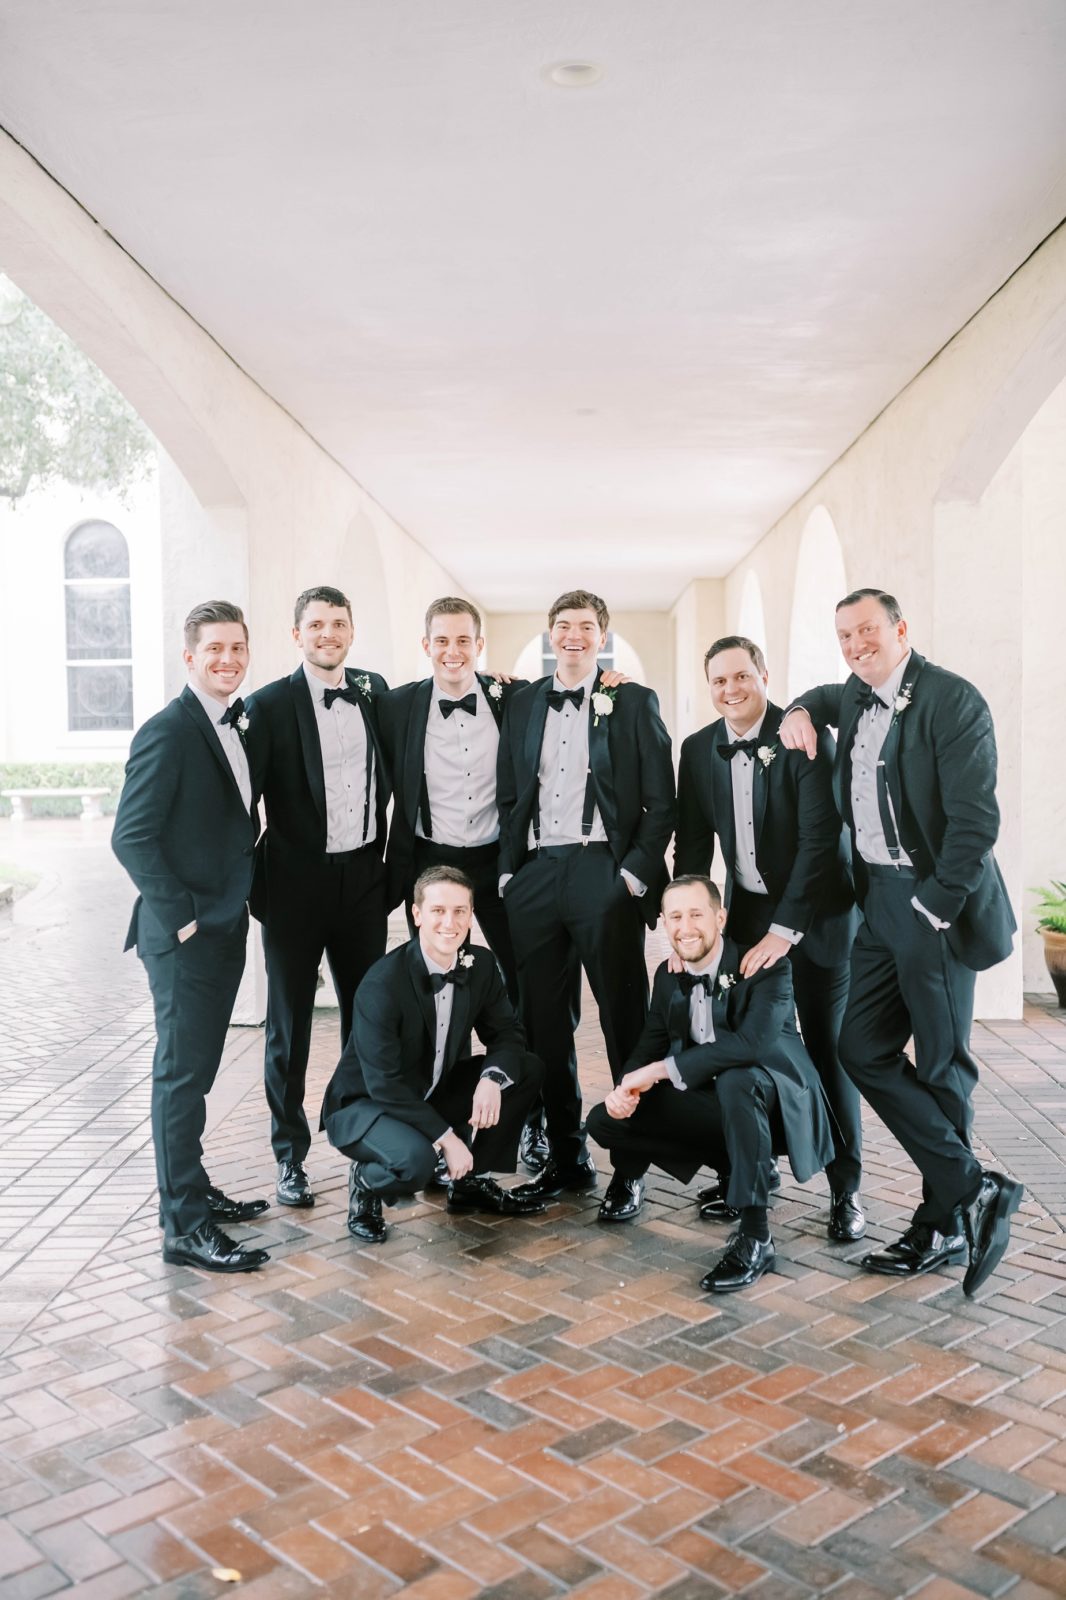 A group of groomsmen laughs while hugging one another captured by Christina Elliott Photography. groomsmen in black black bow ties #christinaelliottphotography #Houstonweddings #catholicchurchweddings #navyblue #sayIdo #Houstonweddingphotographers